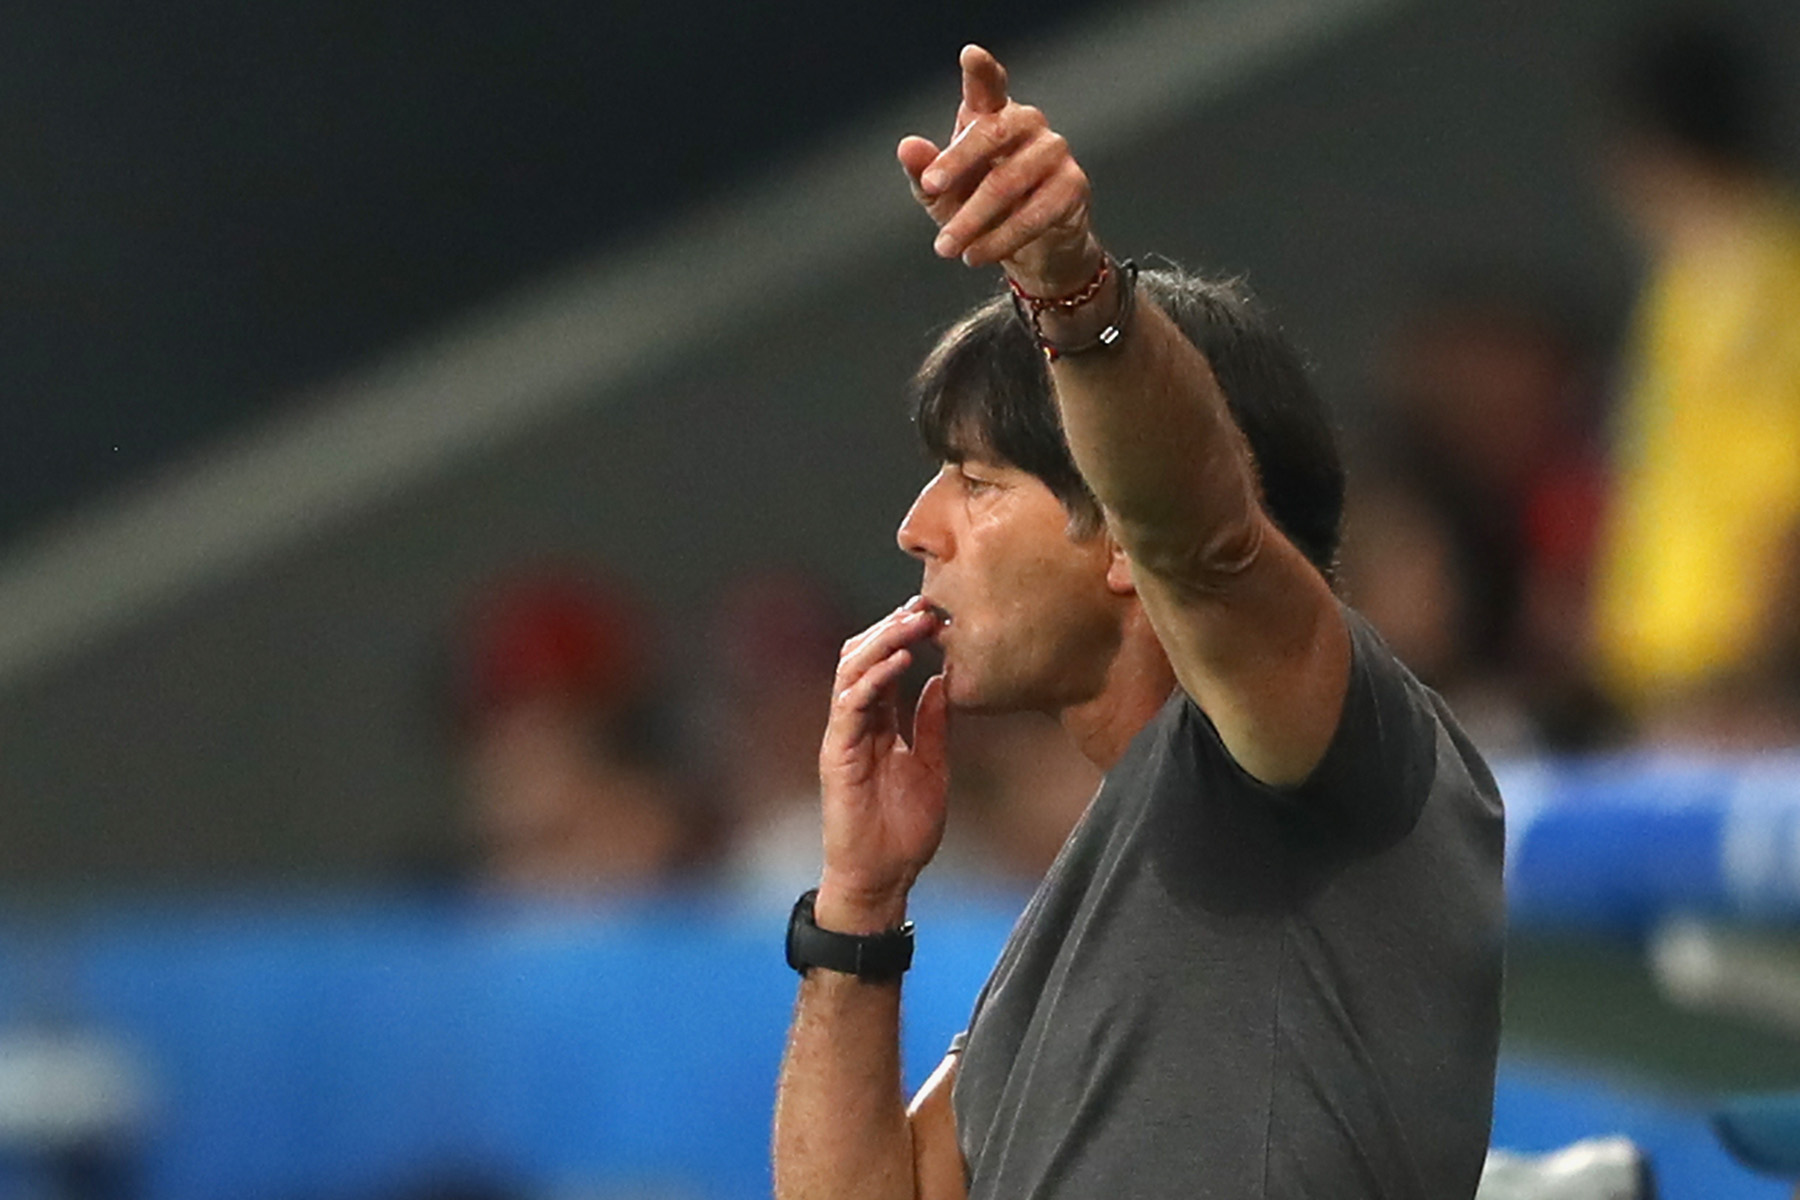 LILLE, FRANCE - JUNE 12:  Joachim Loew, head coach of Germany gestures during the UEFA EURO 2016 Group C match between Germany and Ukraine at Stade Pierre-Mauroy on June 12, 2016 in Lille, France.  (Photo by Alexander Hassenstein/Getty Images)